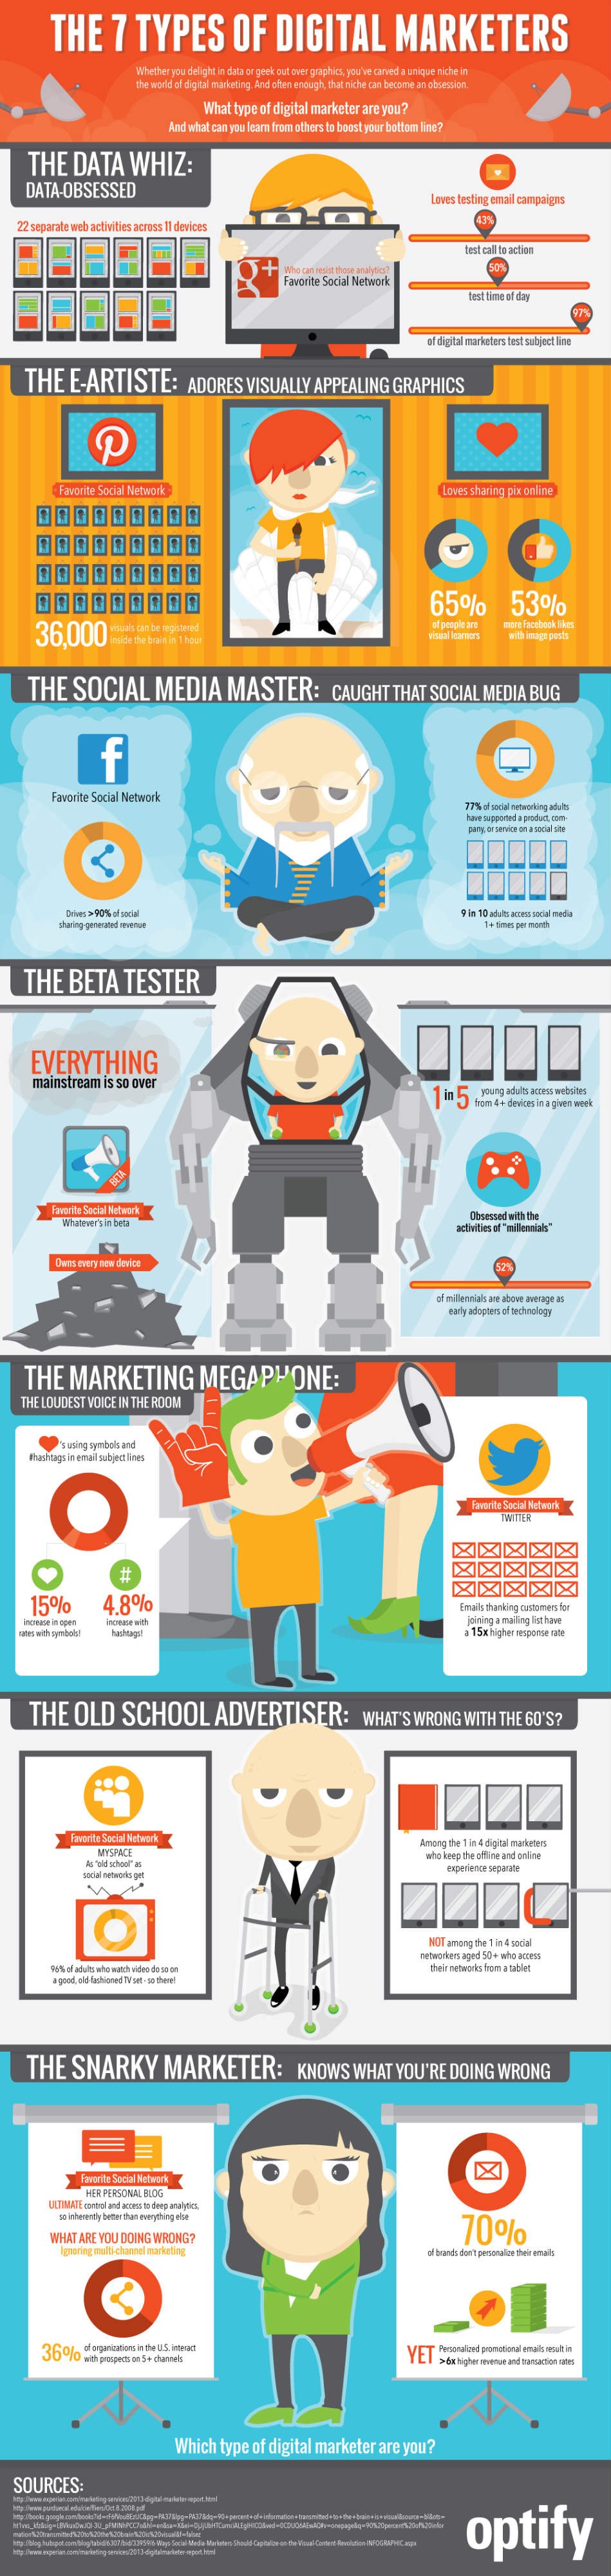 The 7 Types of Digital Marketers